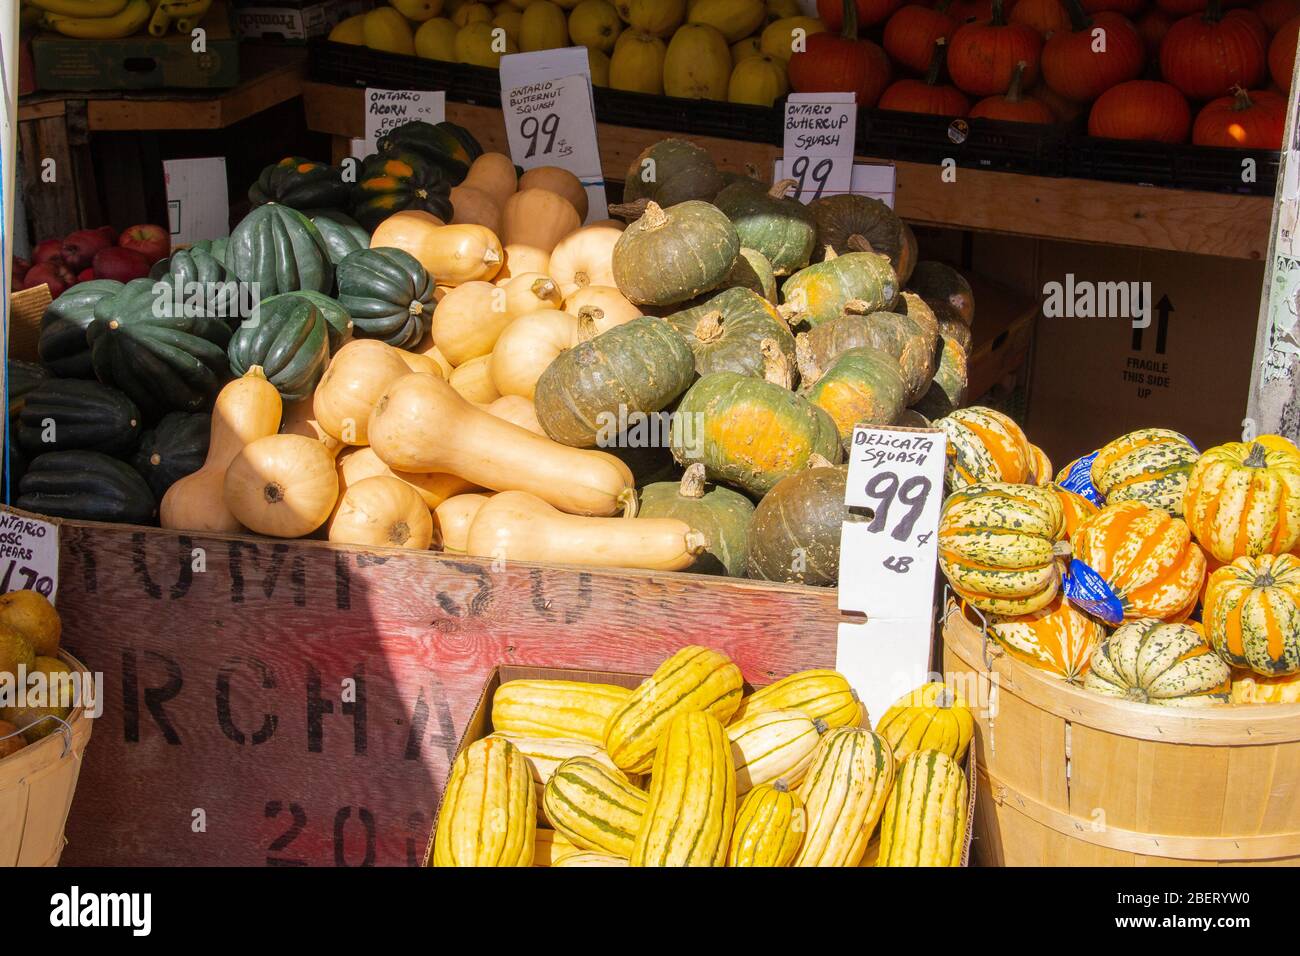 Squash for sale in a market Stock Photo